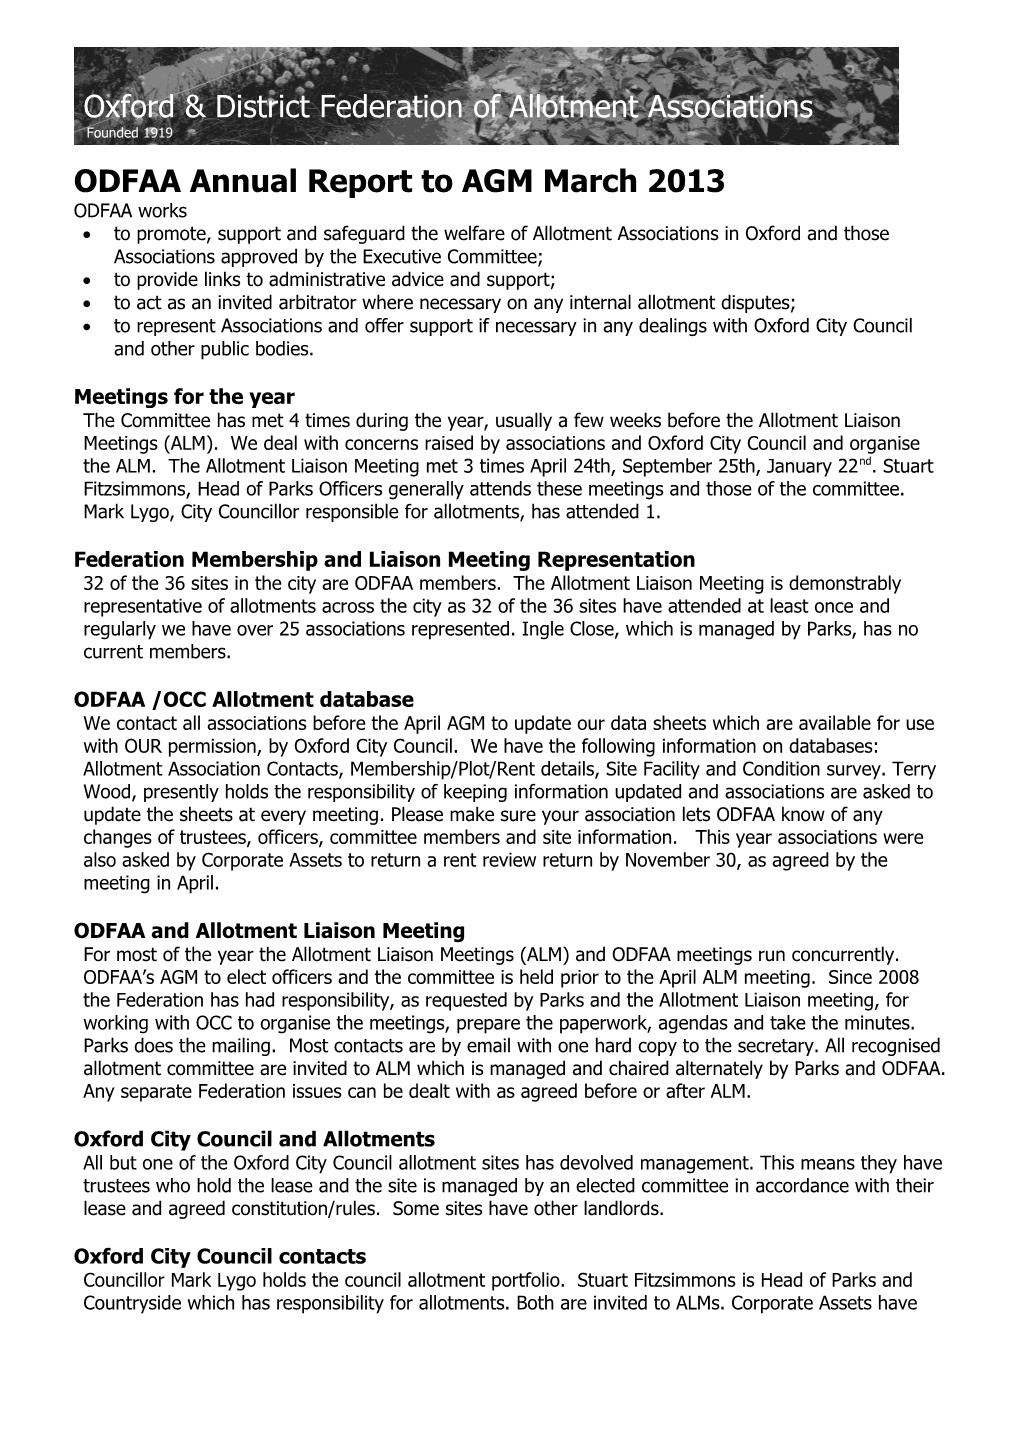 ODFAA Annual Report to AGM March 2012